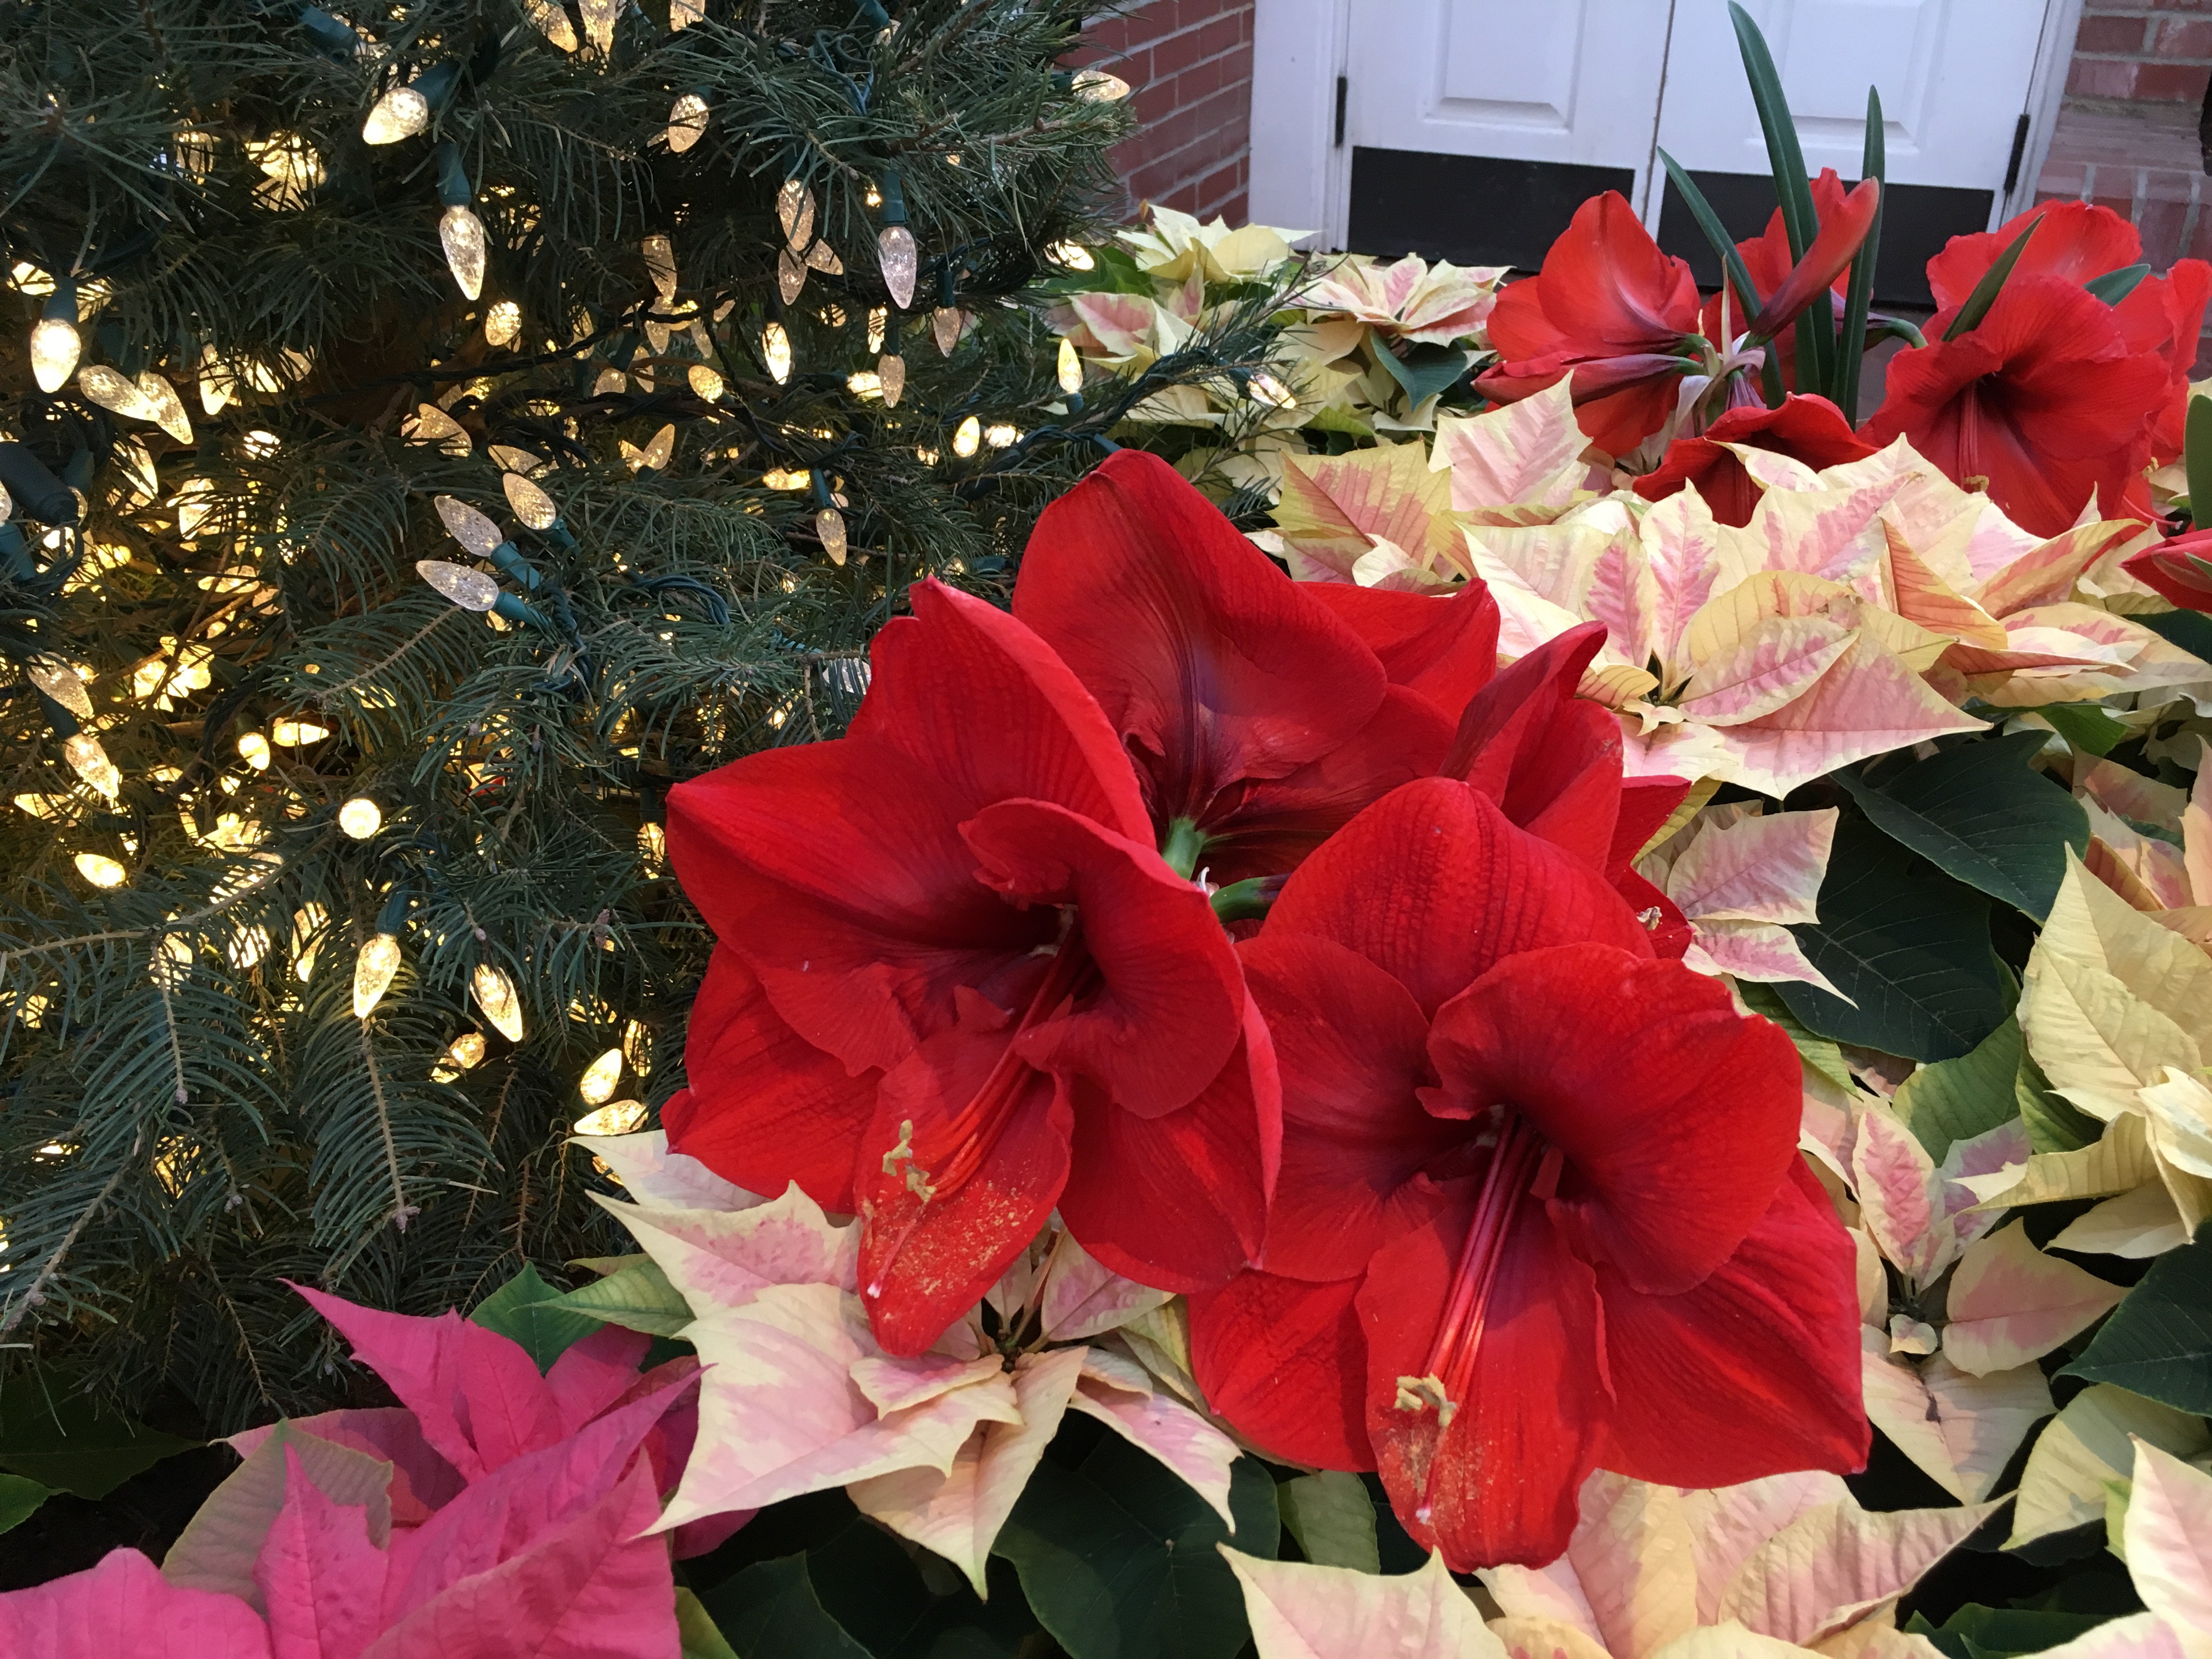 Phipps Conservatory - Poinsettieas